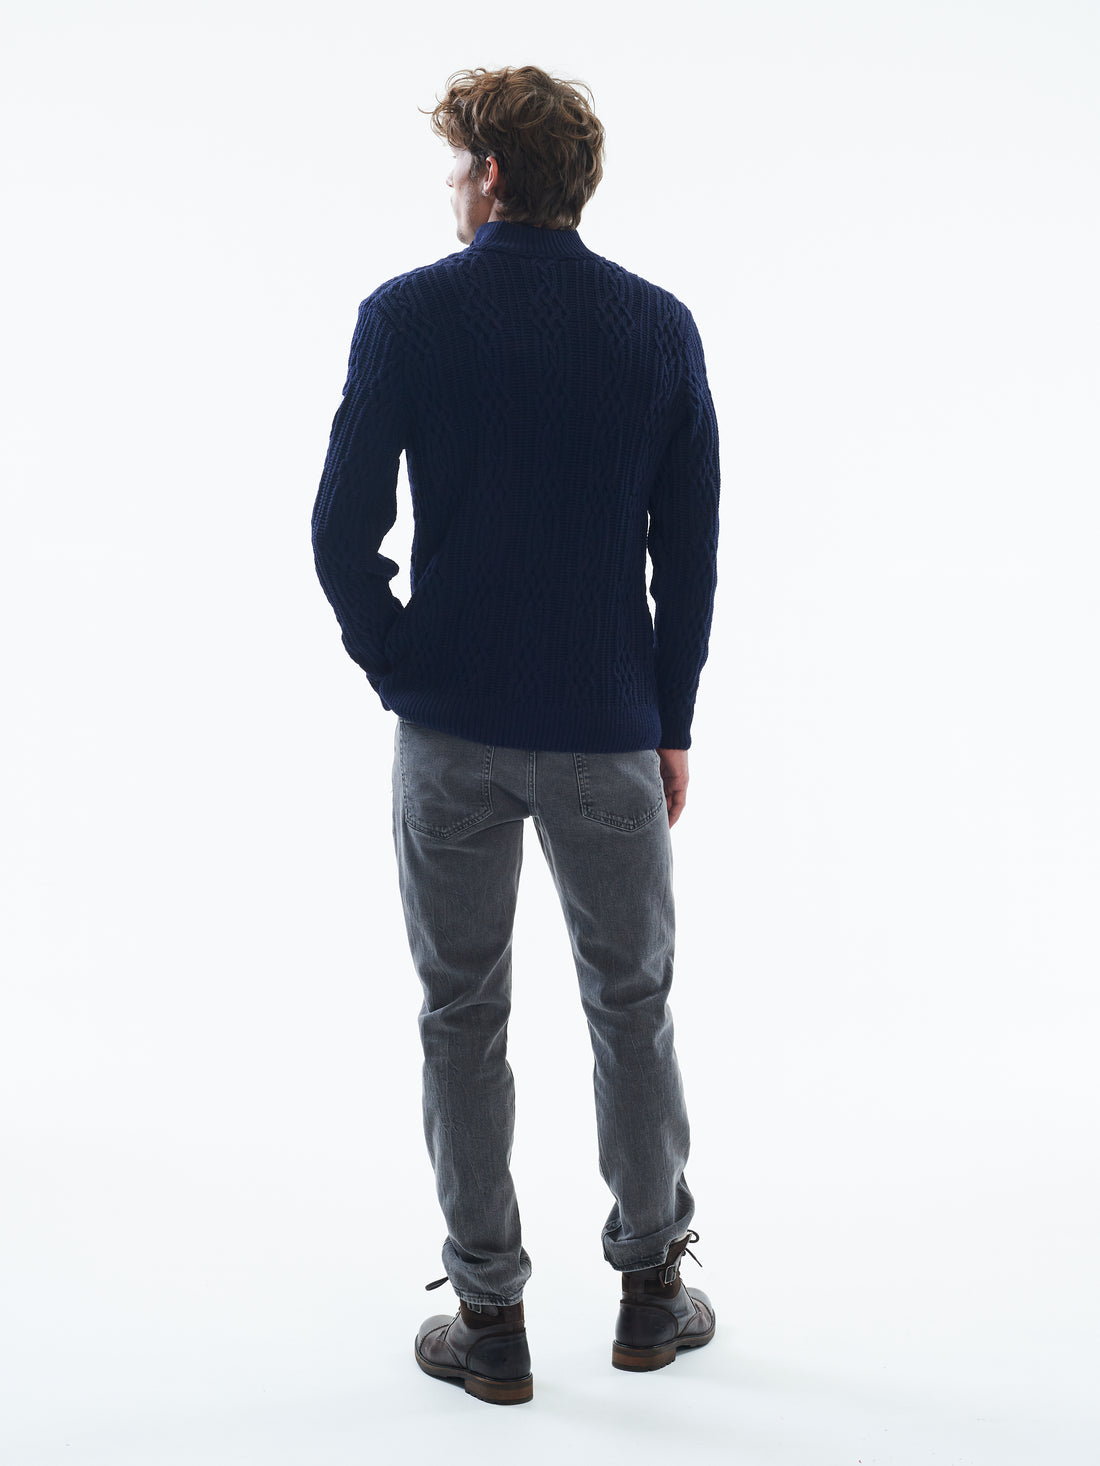 Dale of Norway - Hoven Sweater - Navy